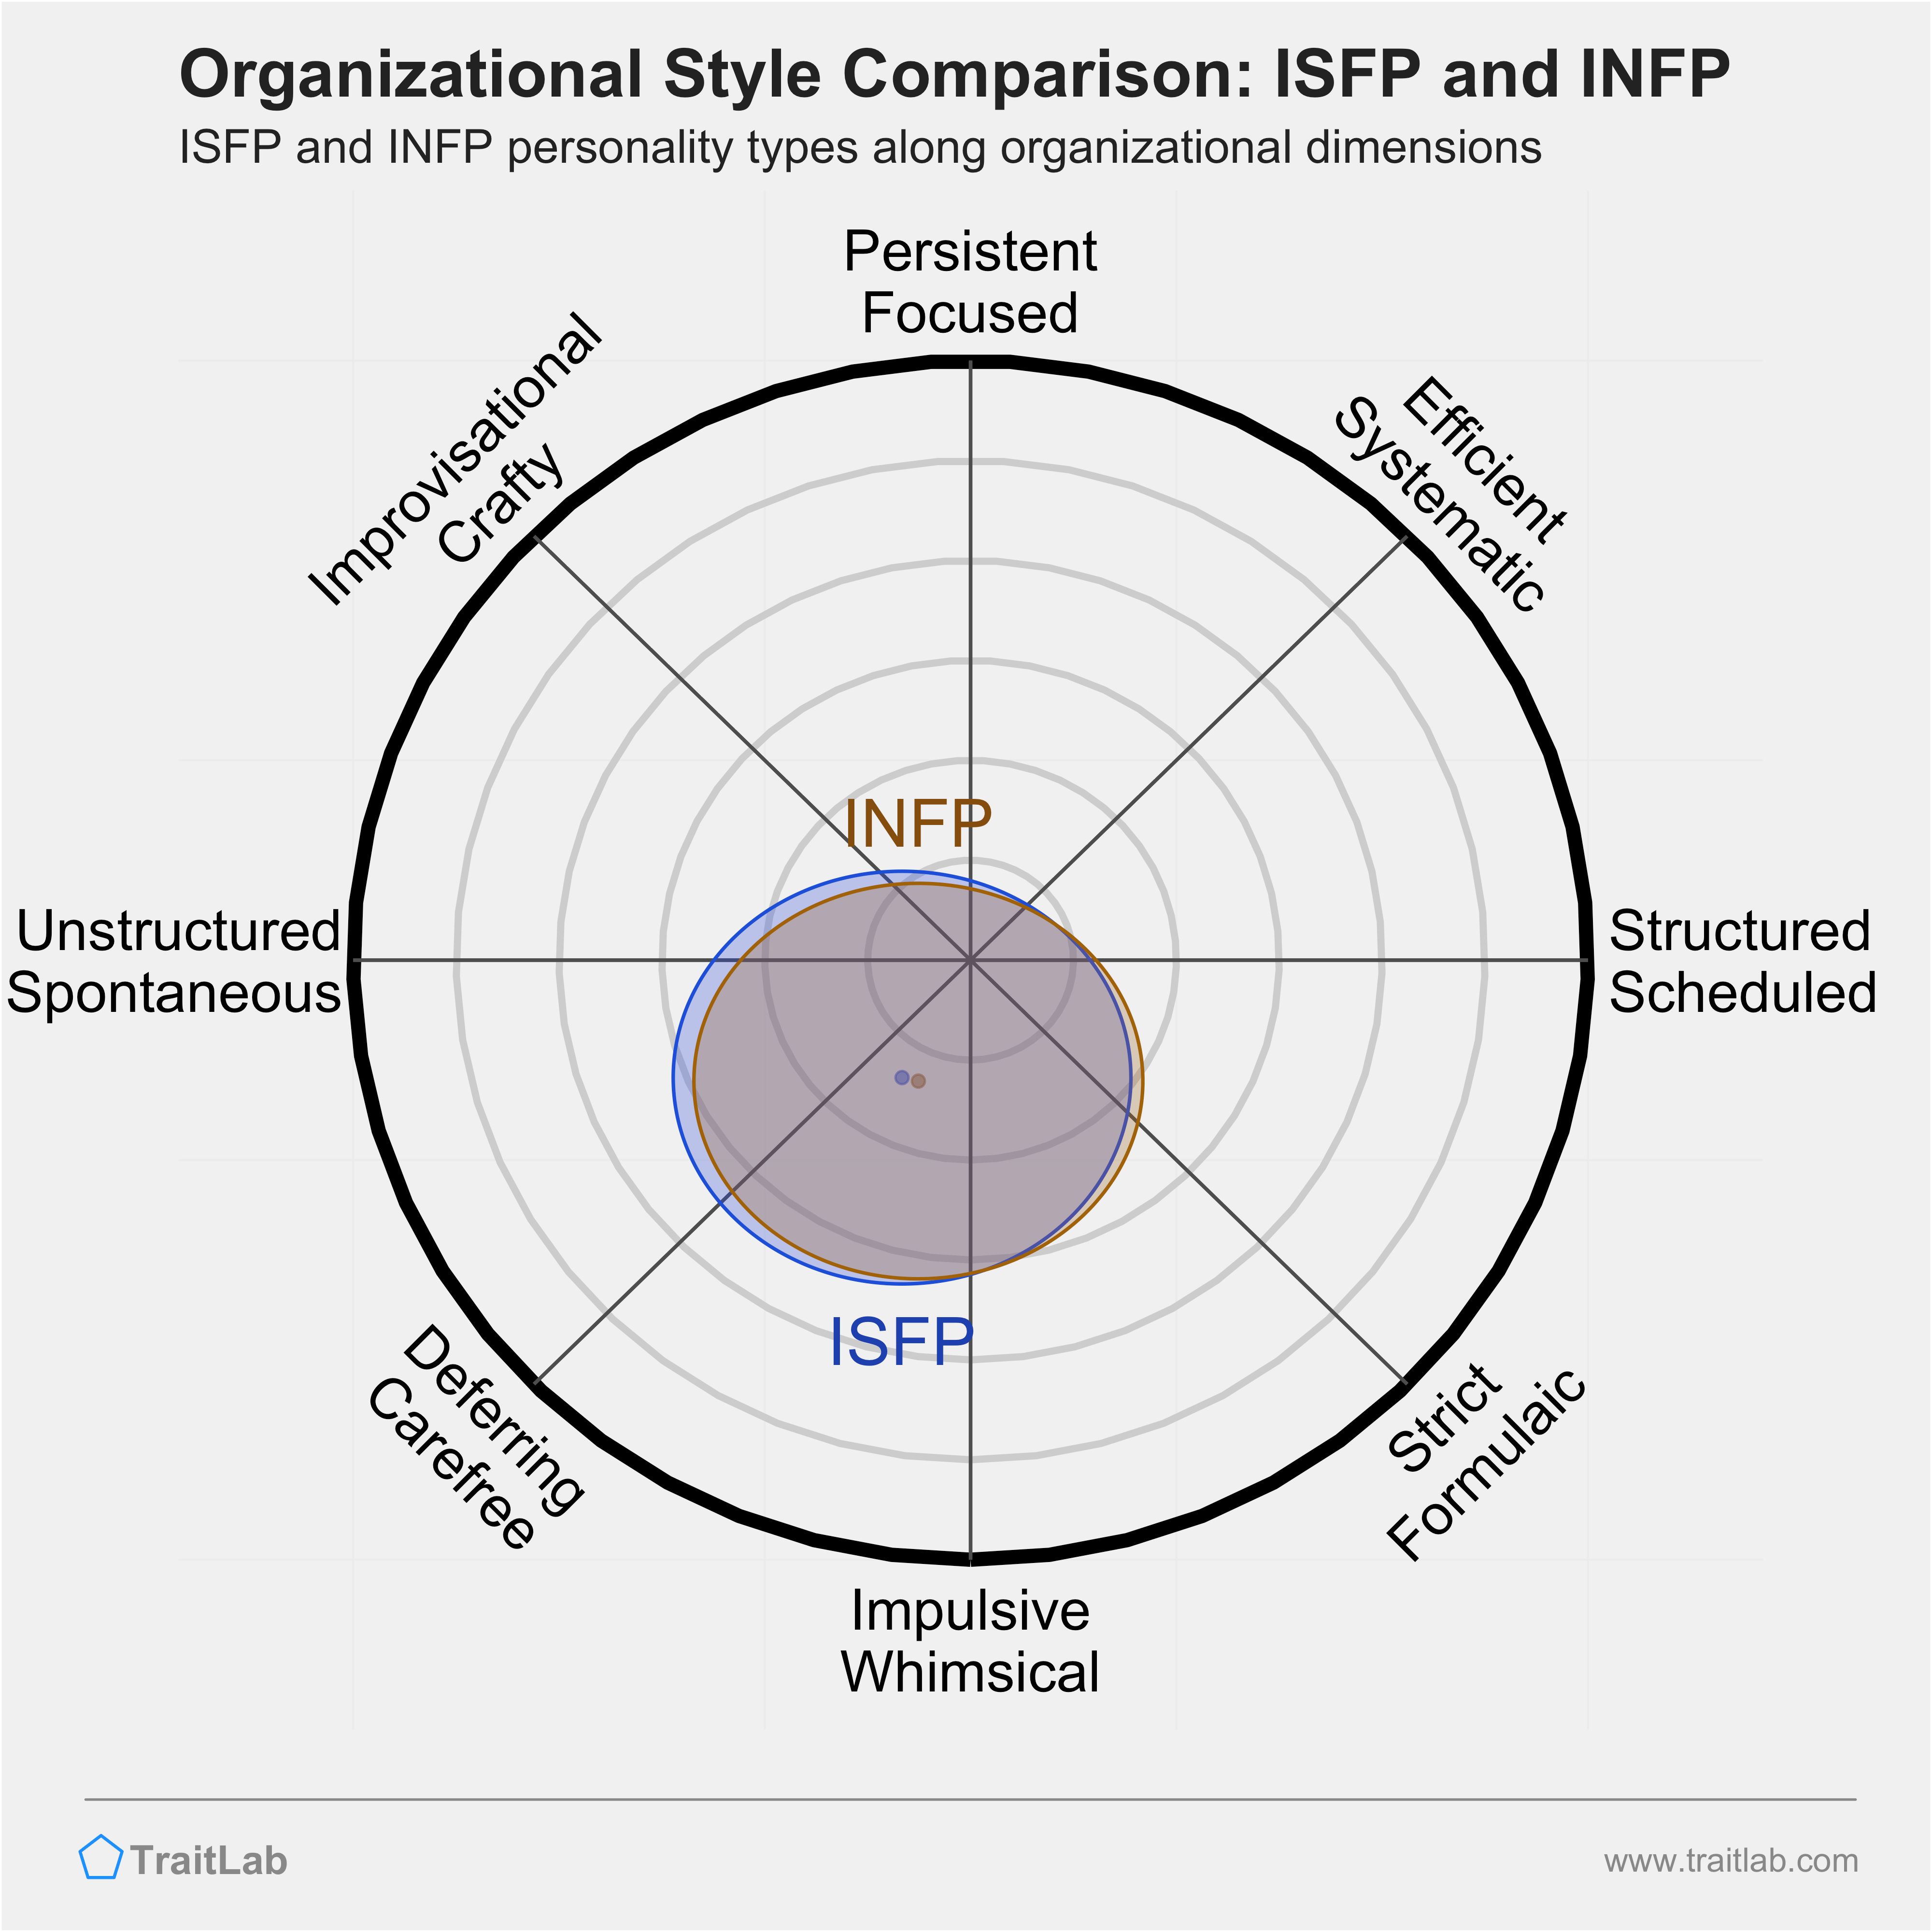 ISFP and INFP comparison across organizational dimensions